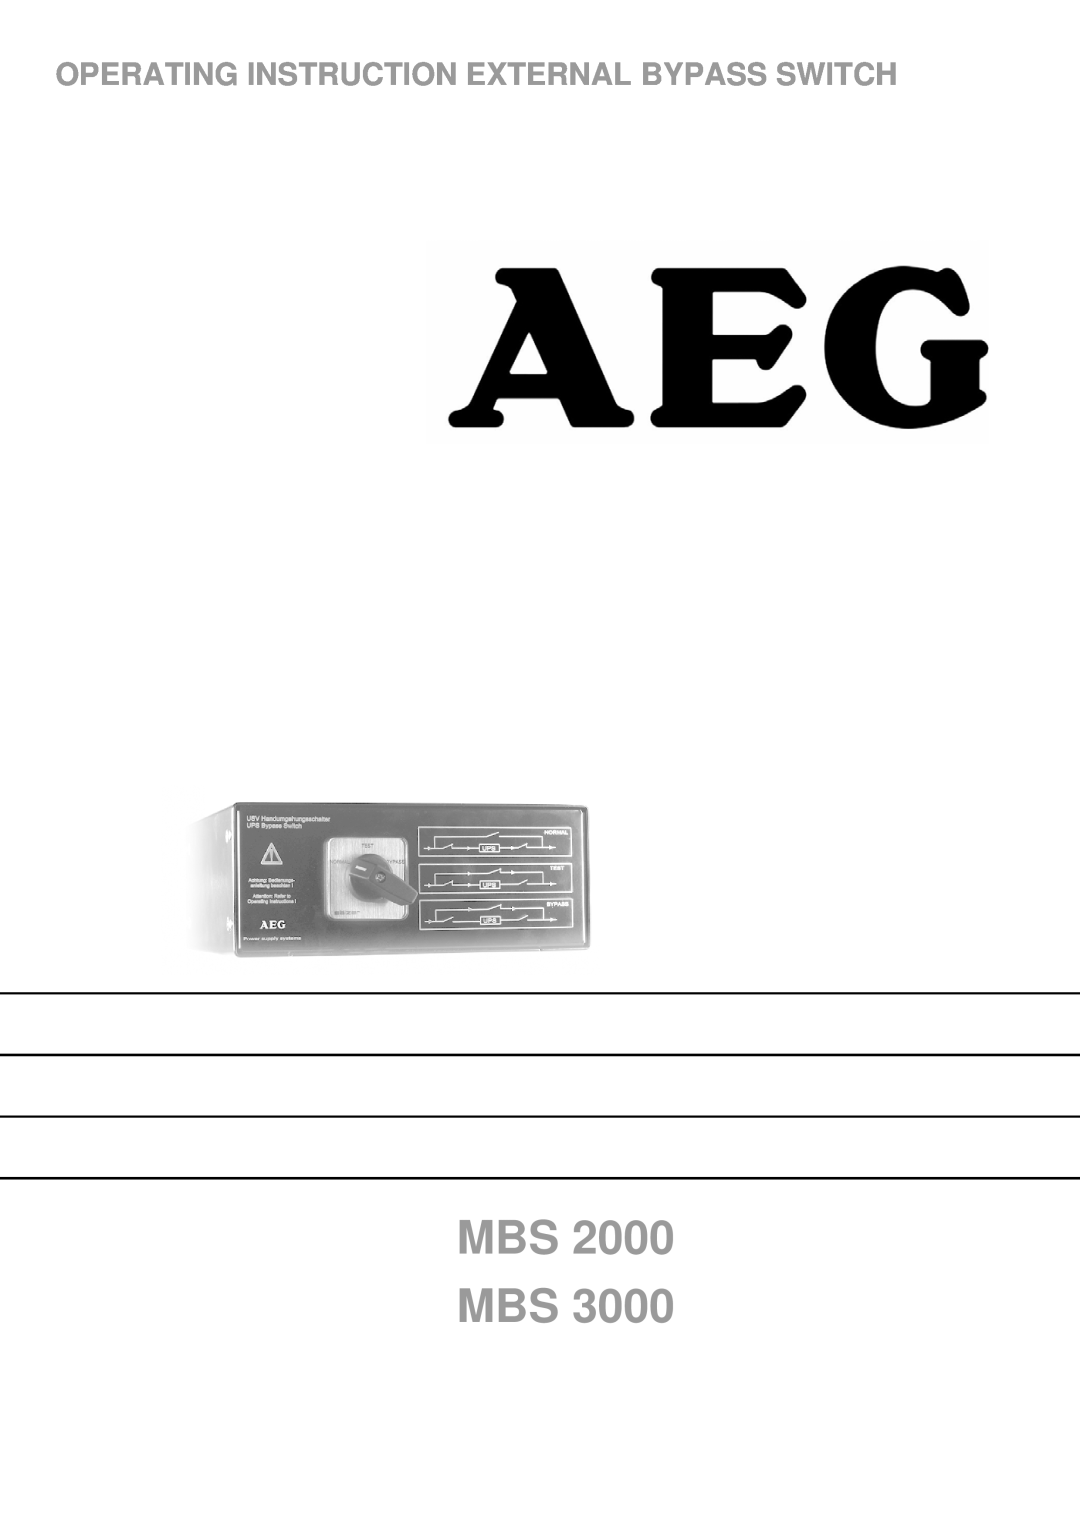 AEG manual MBS 2000 MBS, Operating Instruction External Bypass Switch 